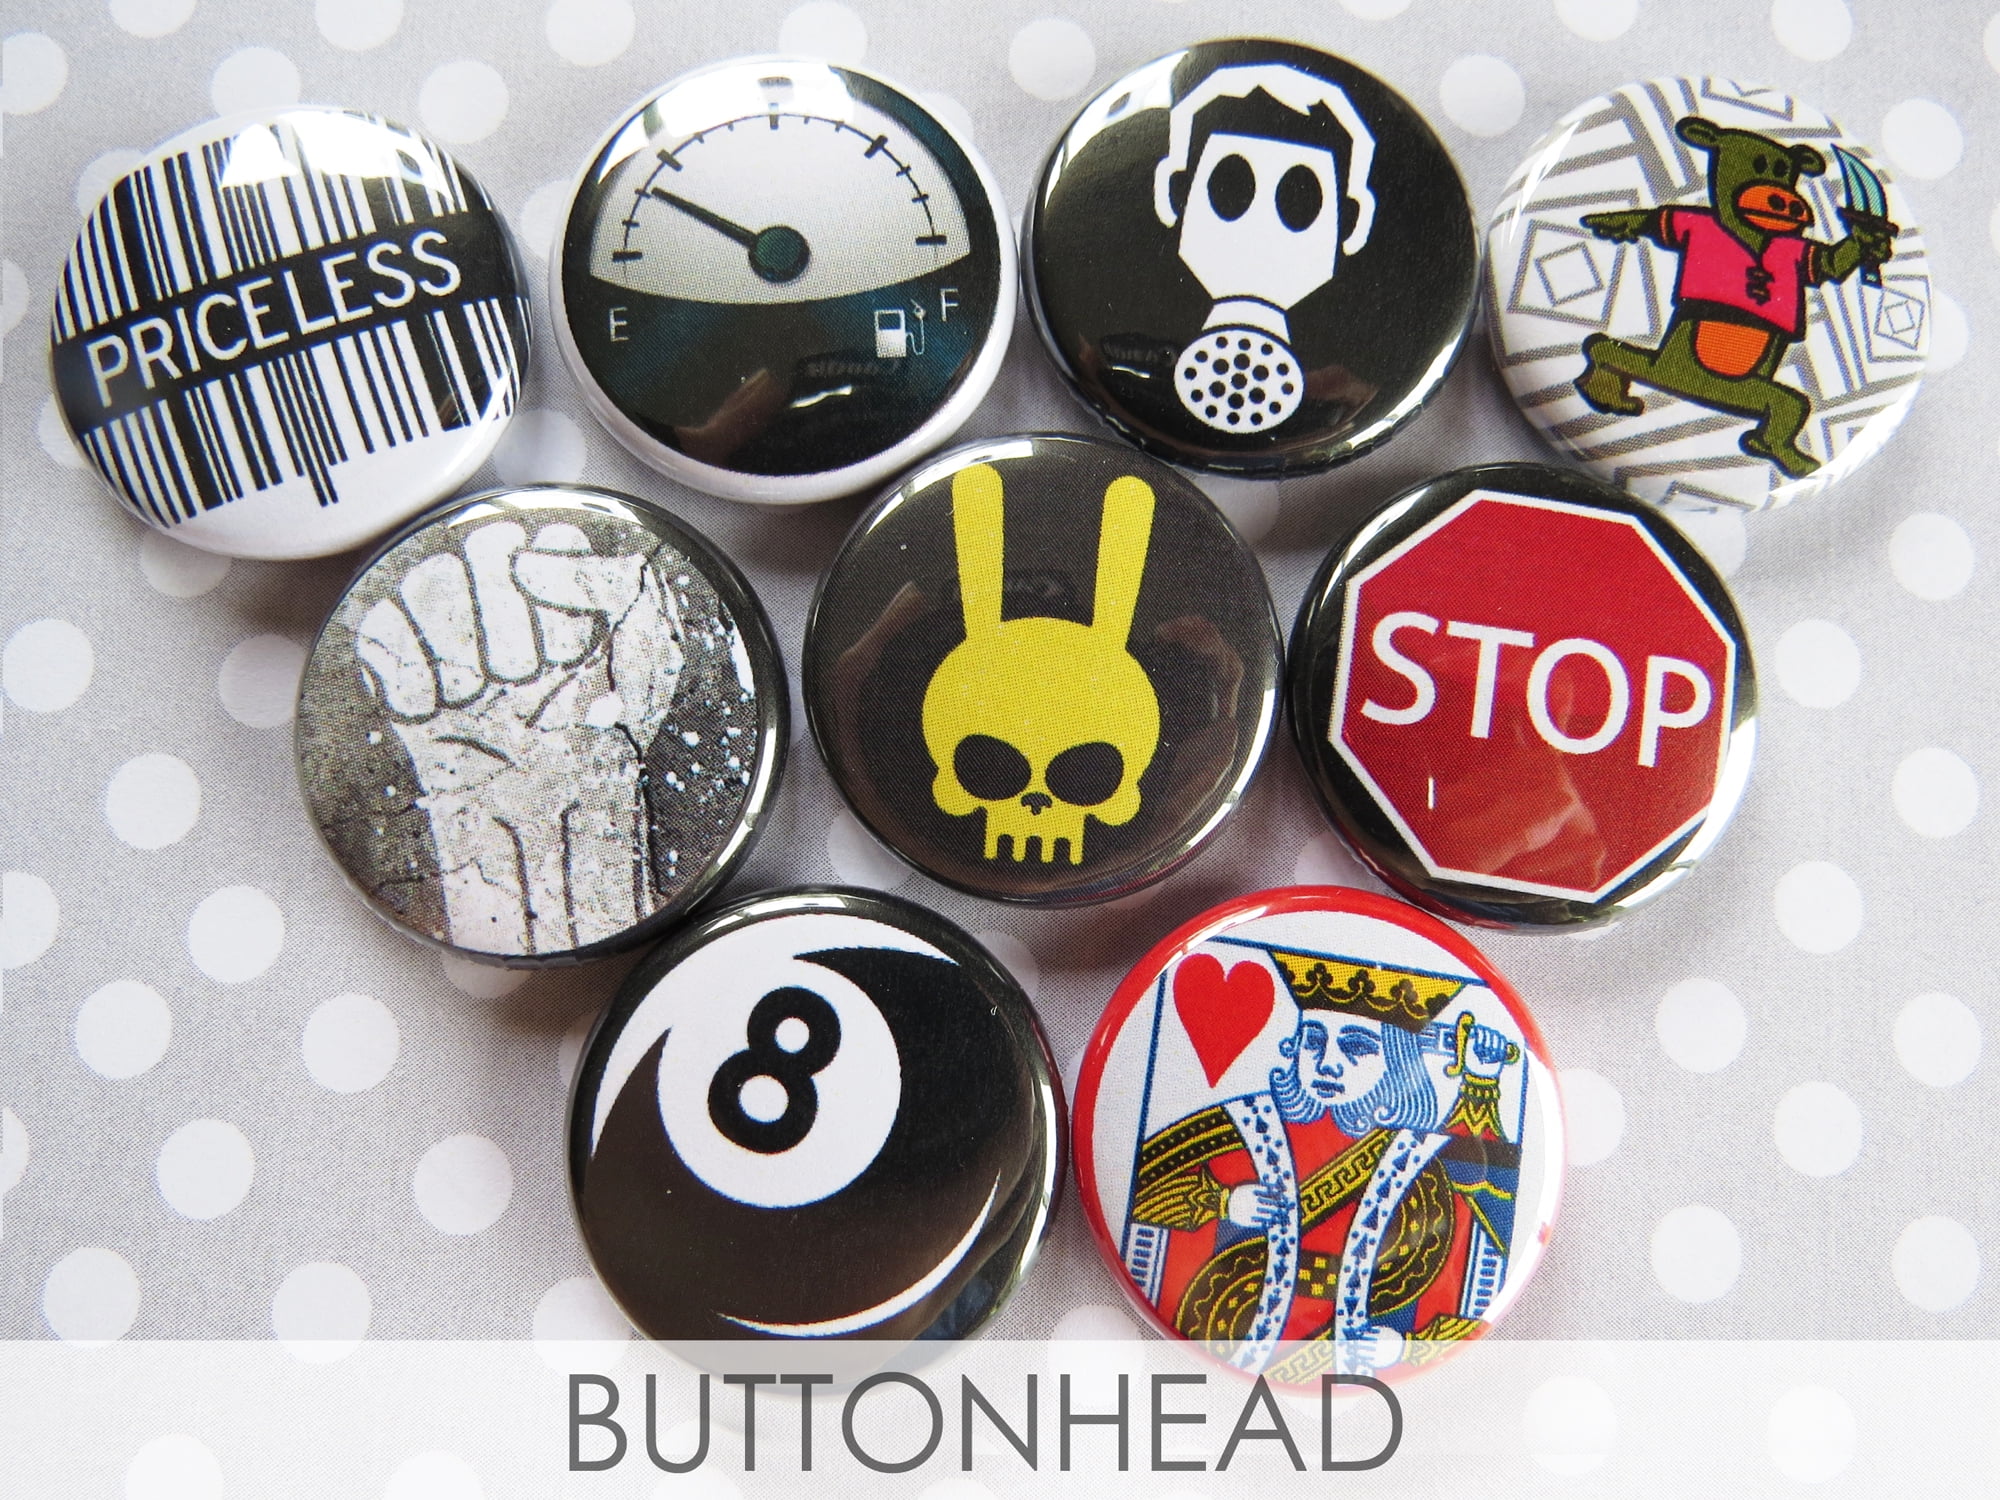 27 Pieces Mixed Pinback Buttons 1.7 inch Round Letter Skull Head Mouse Animal Button Pins for Backpacks Punk Buttons Badges Accessories Gifts